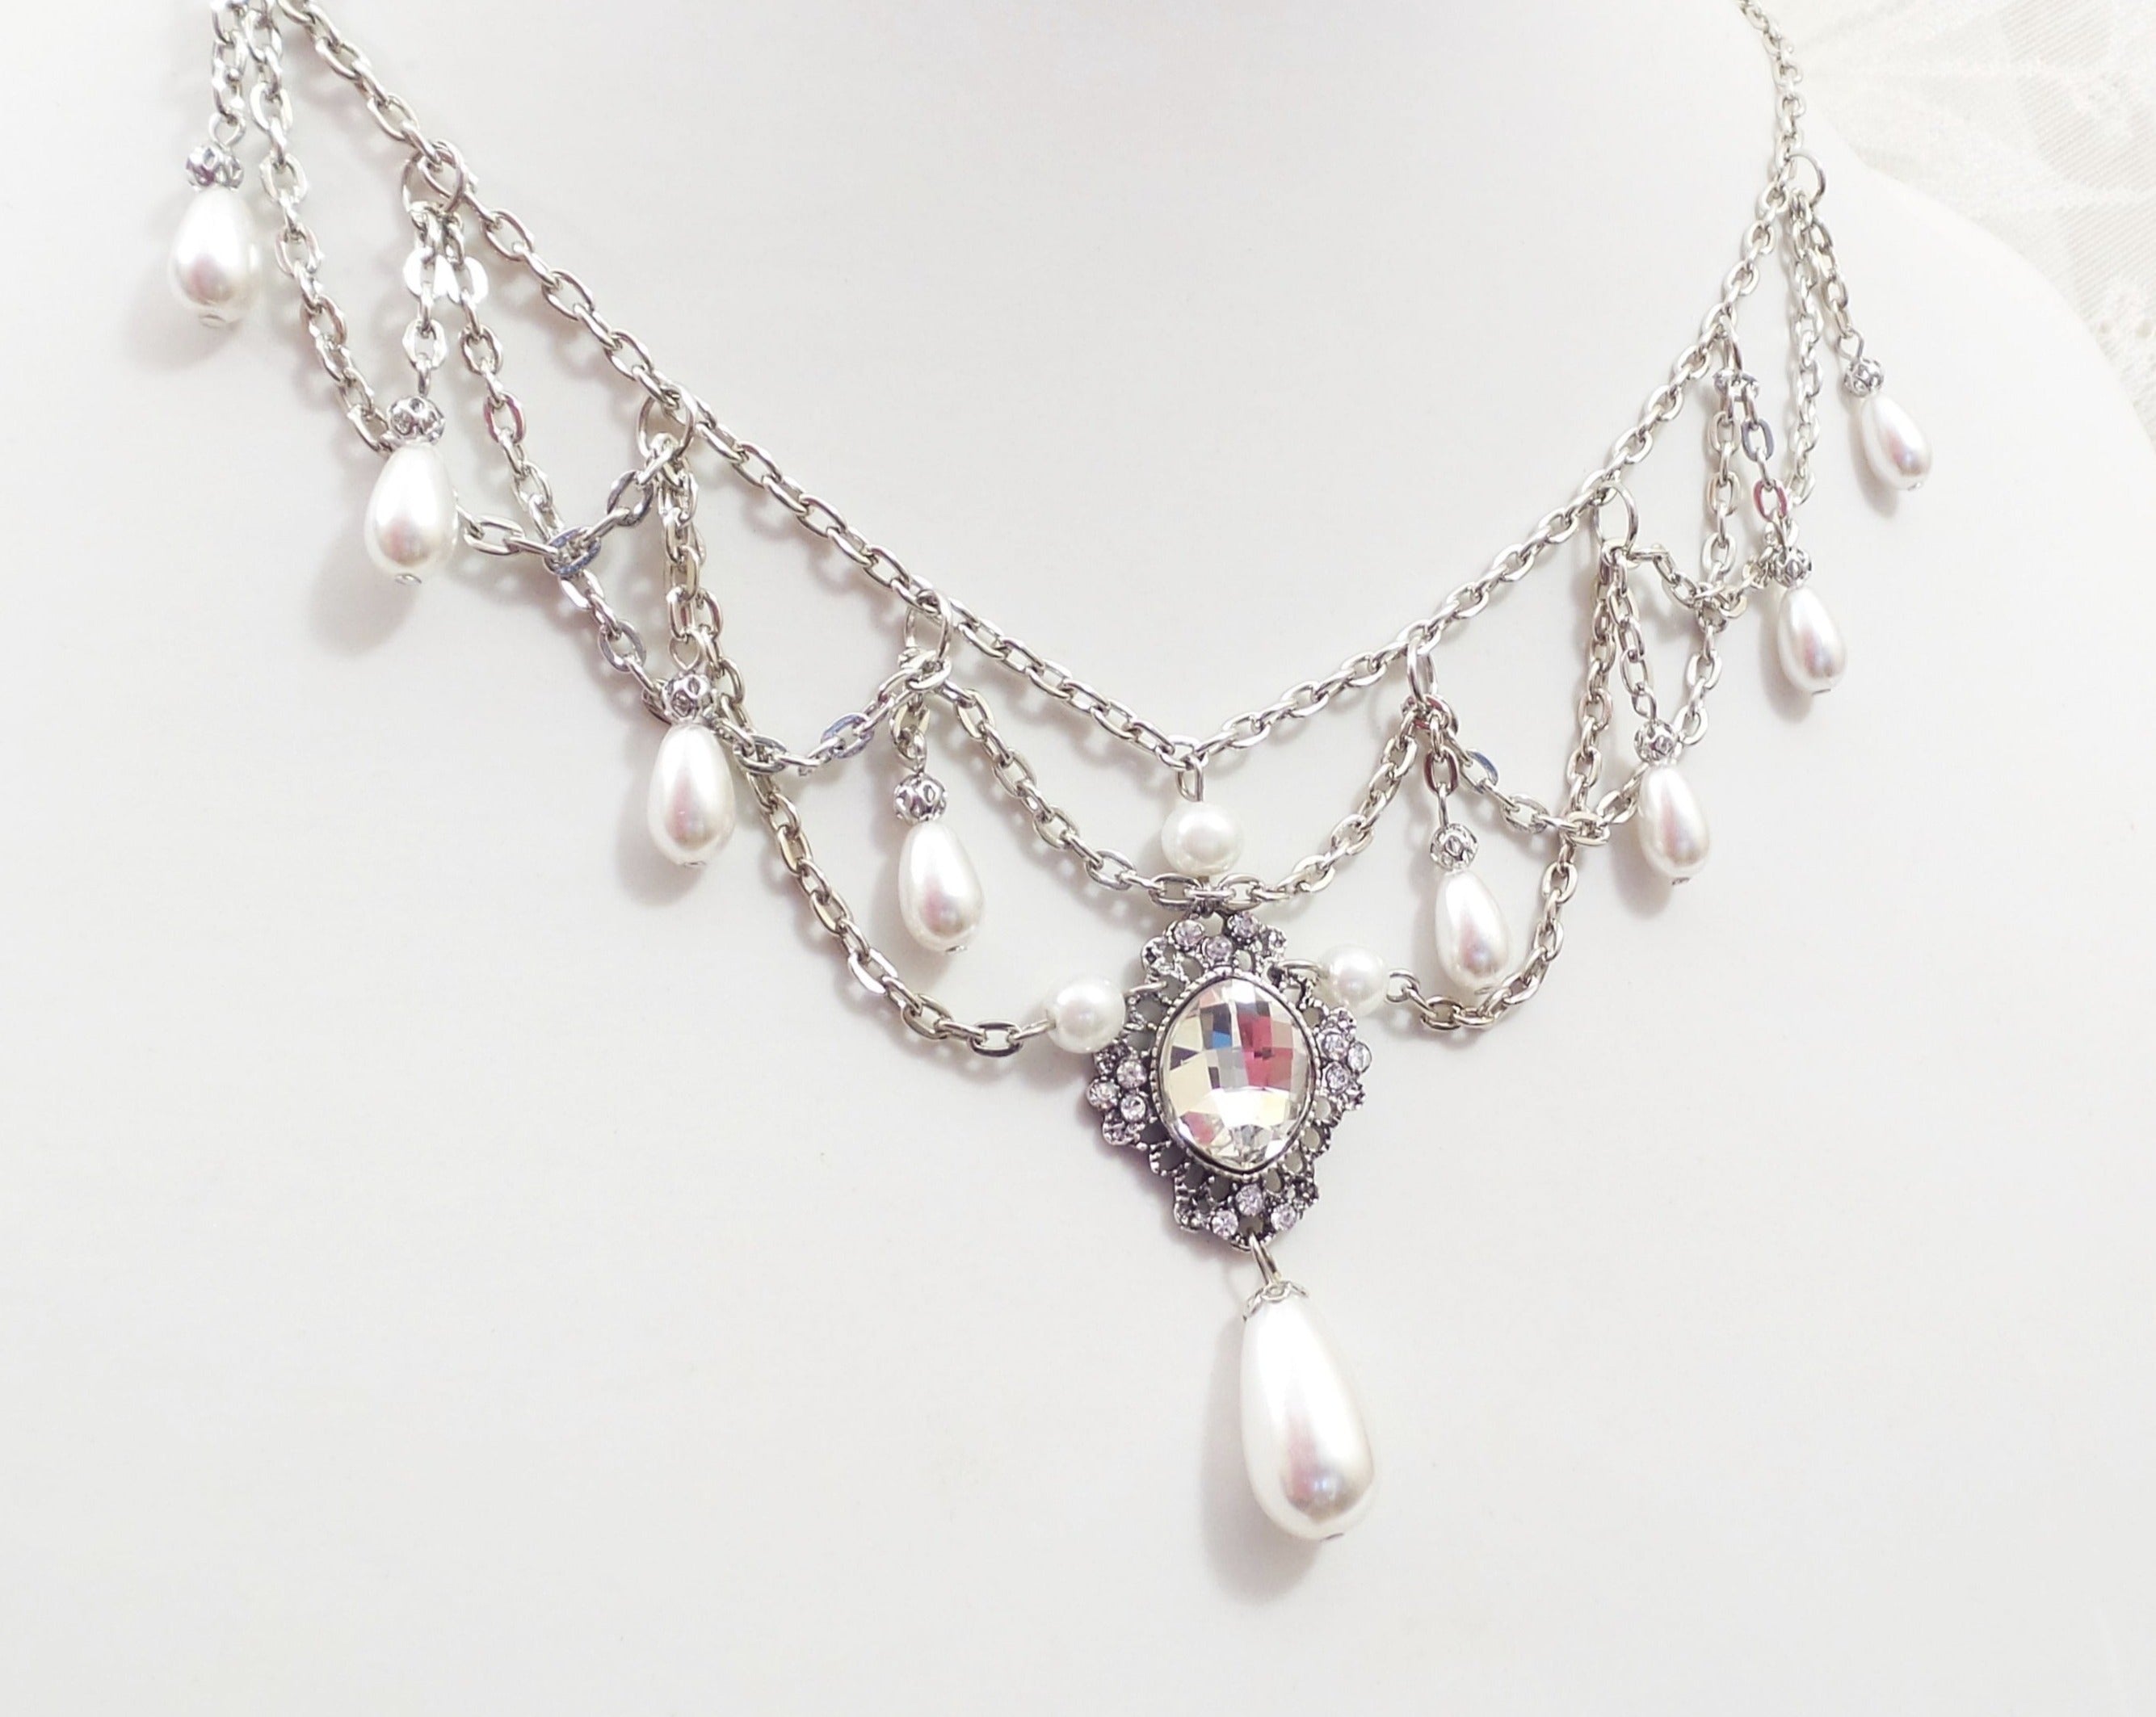 Victorian Seed Pearl Necklace | A.R. Ullmann